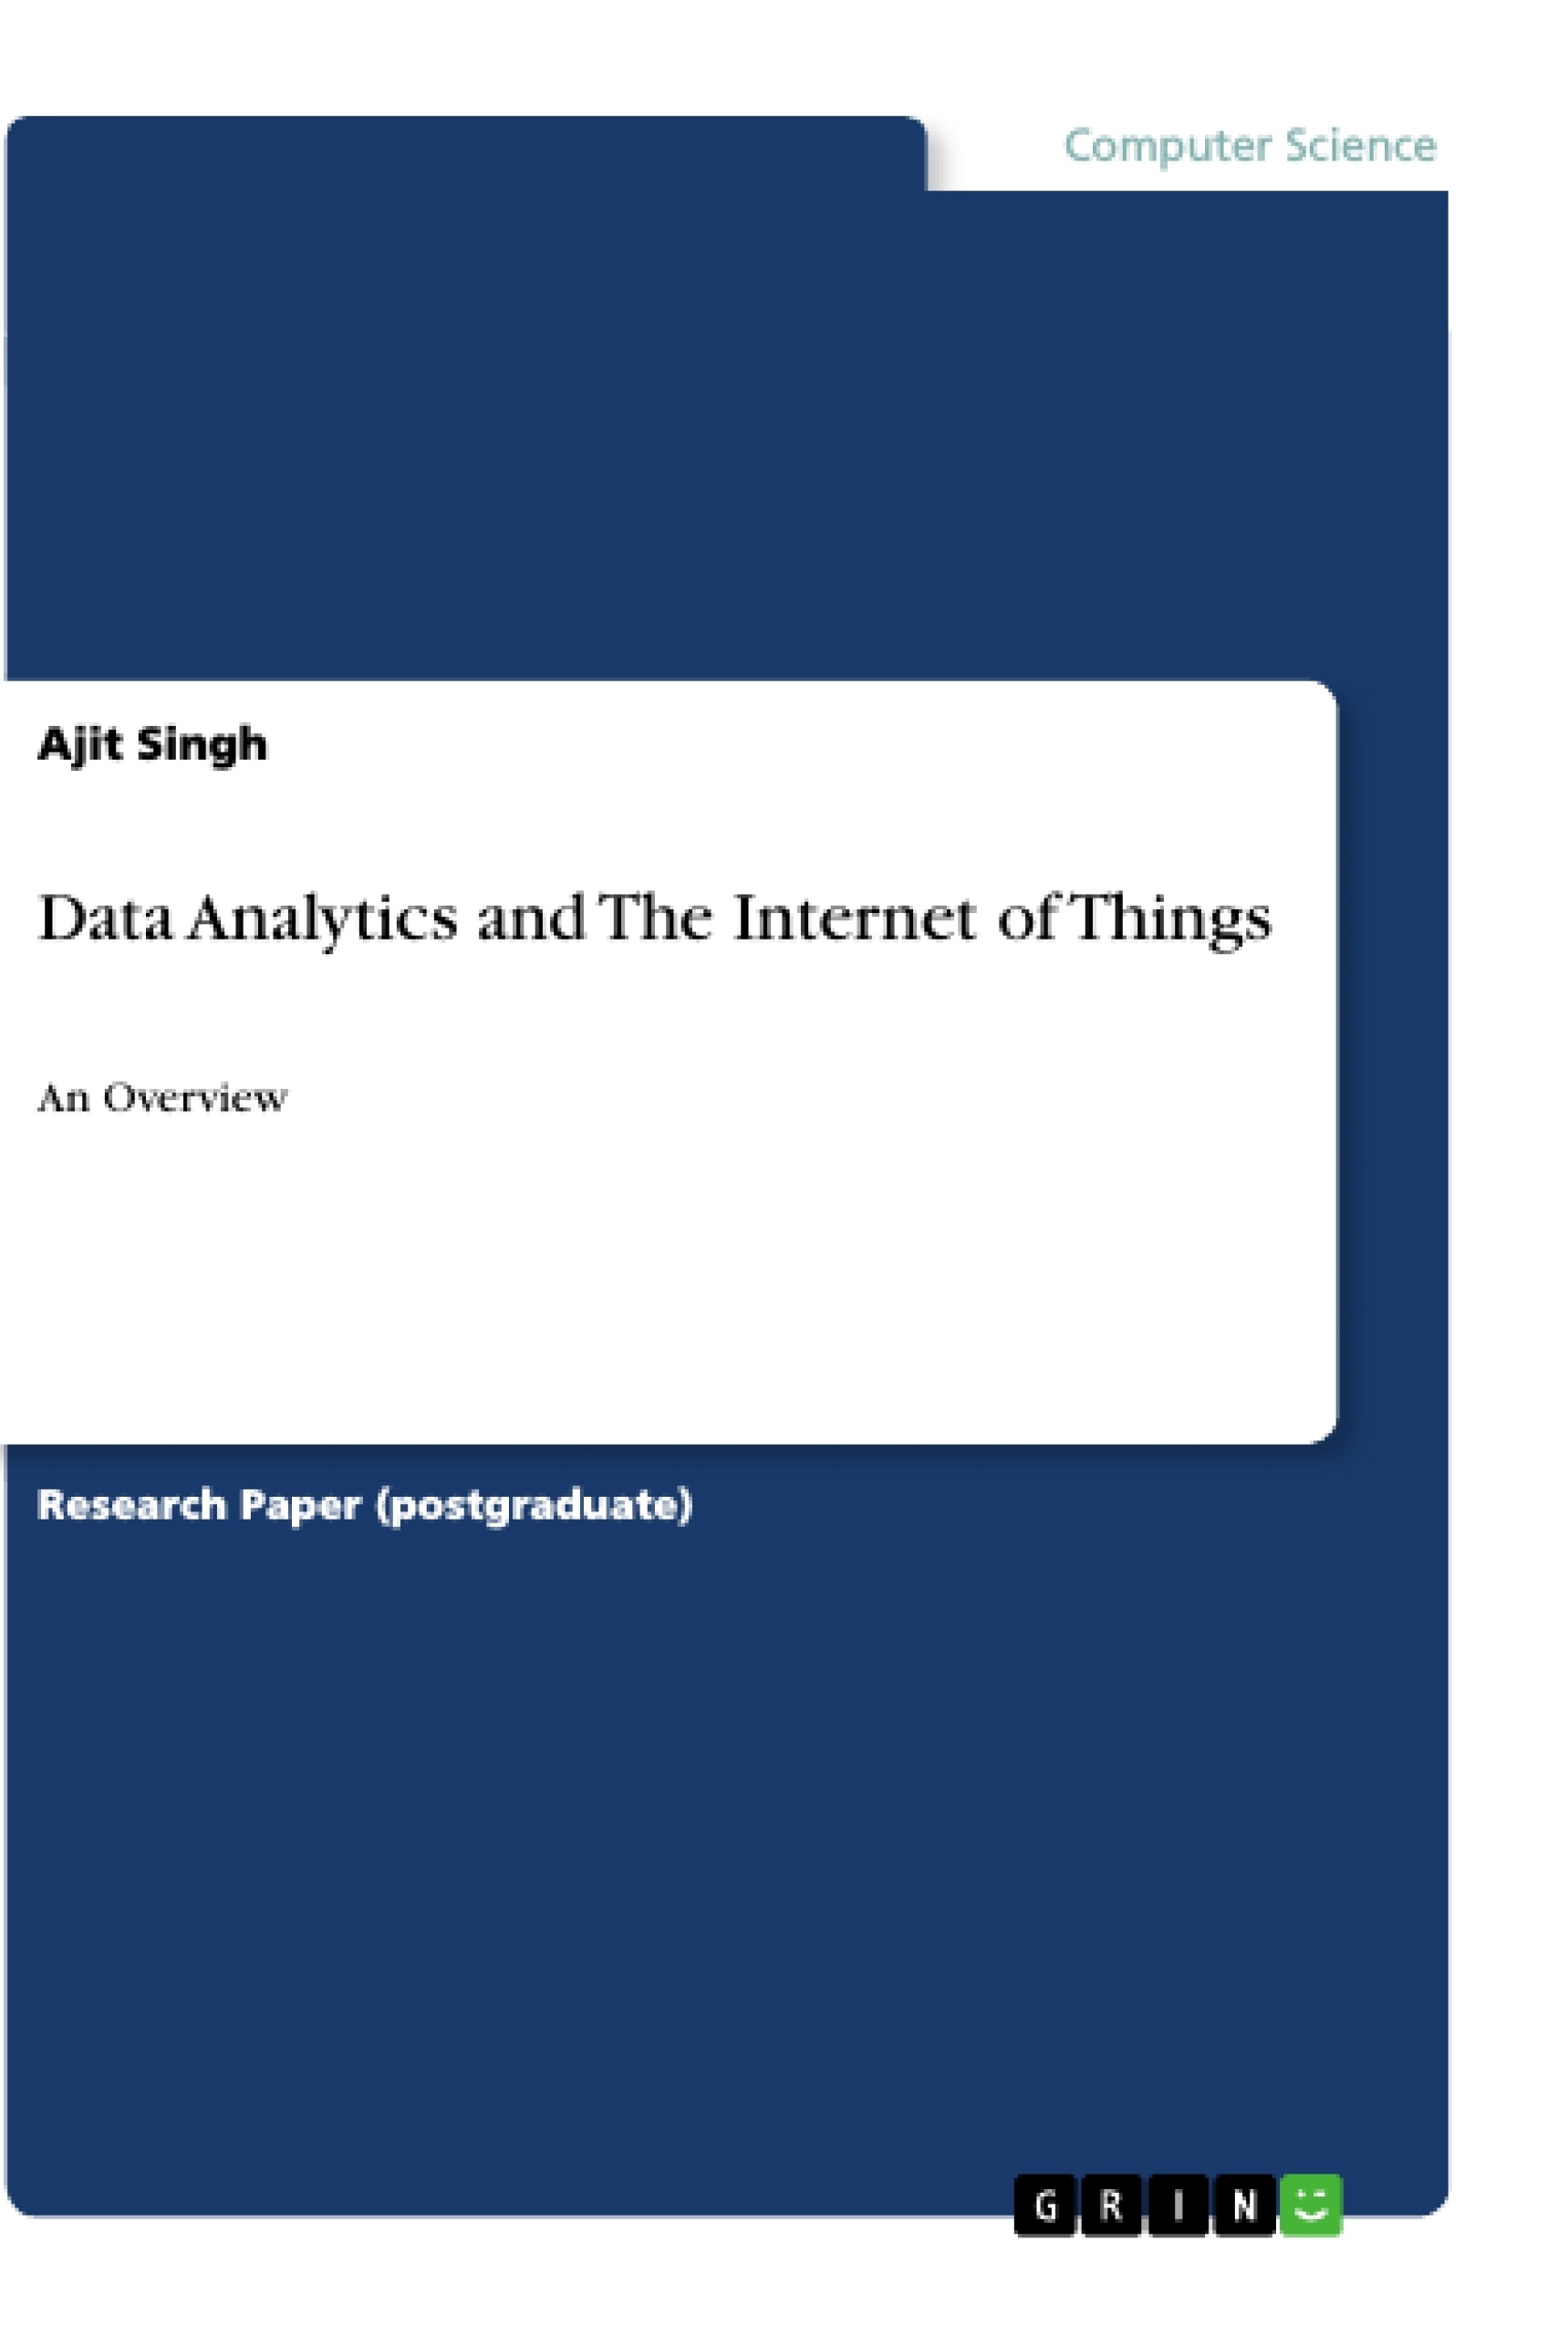 Título: Data Analytics and The Internet of Things